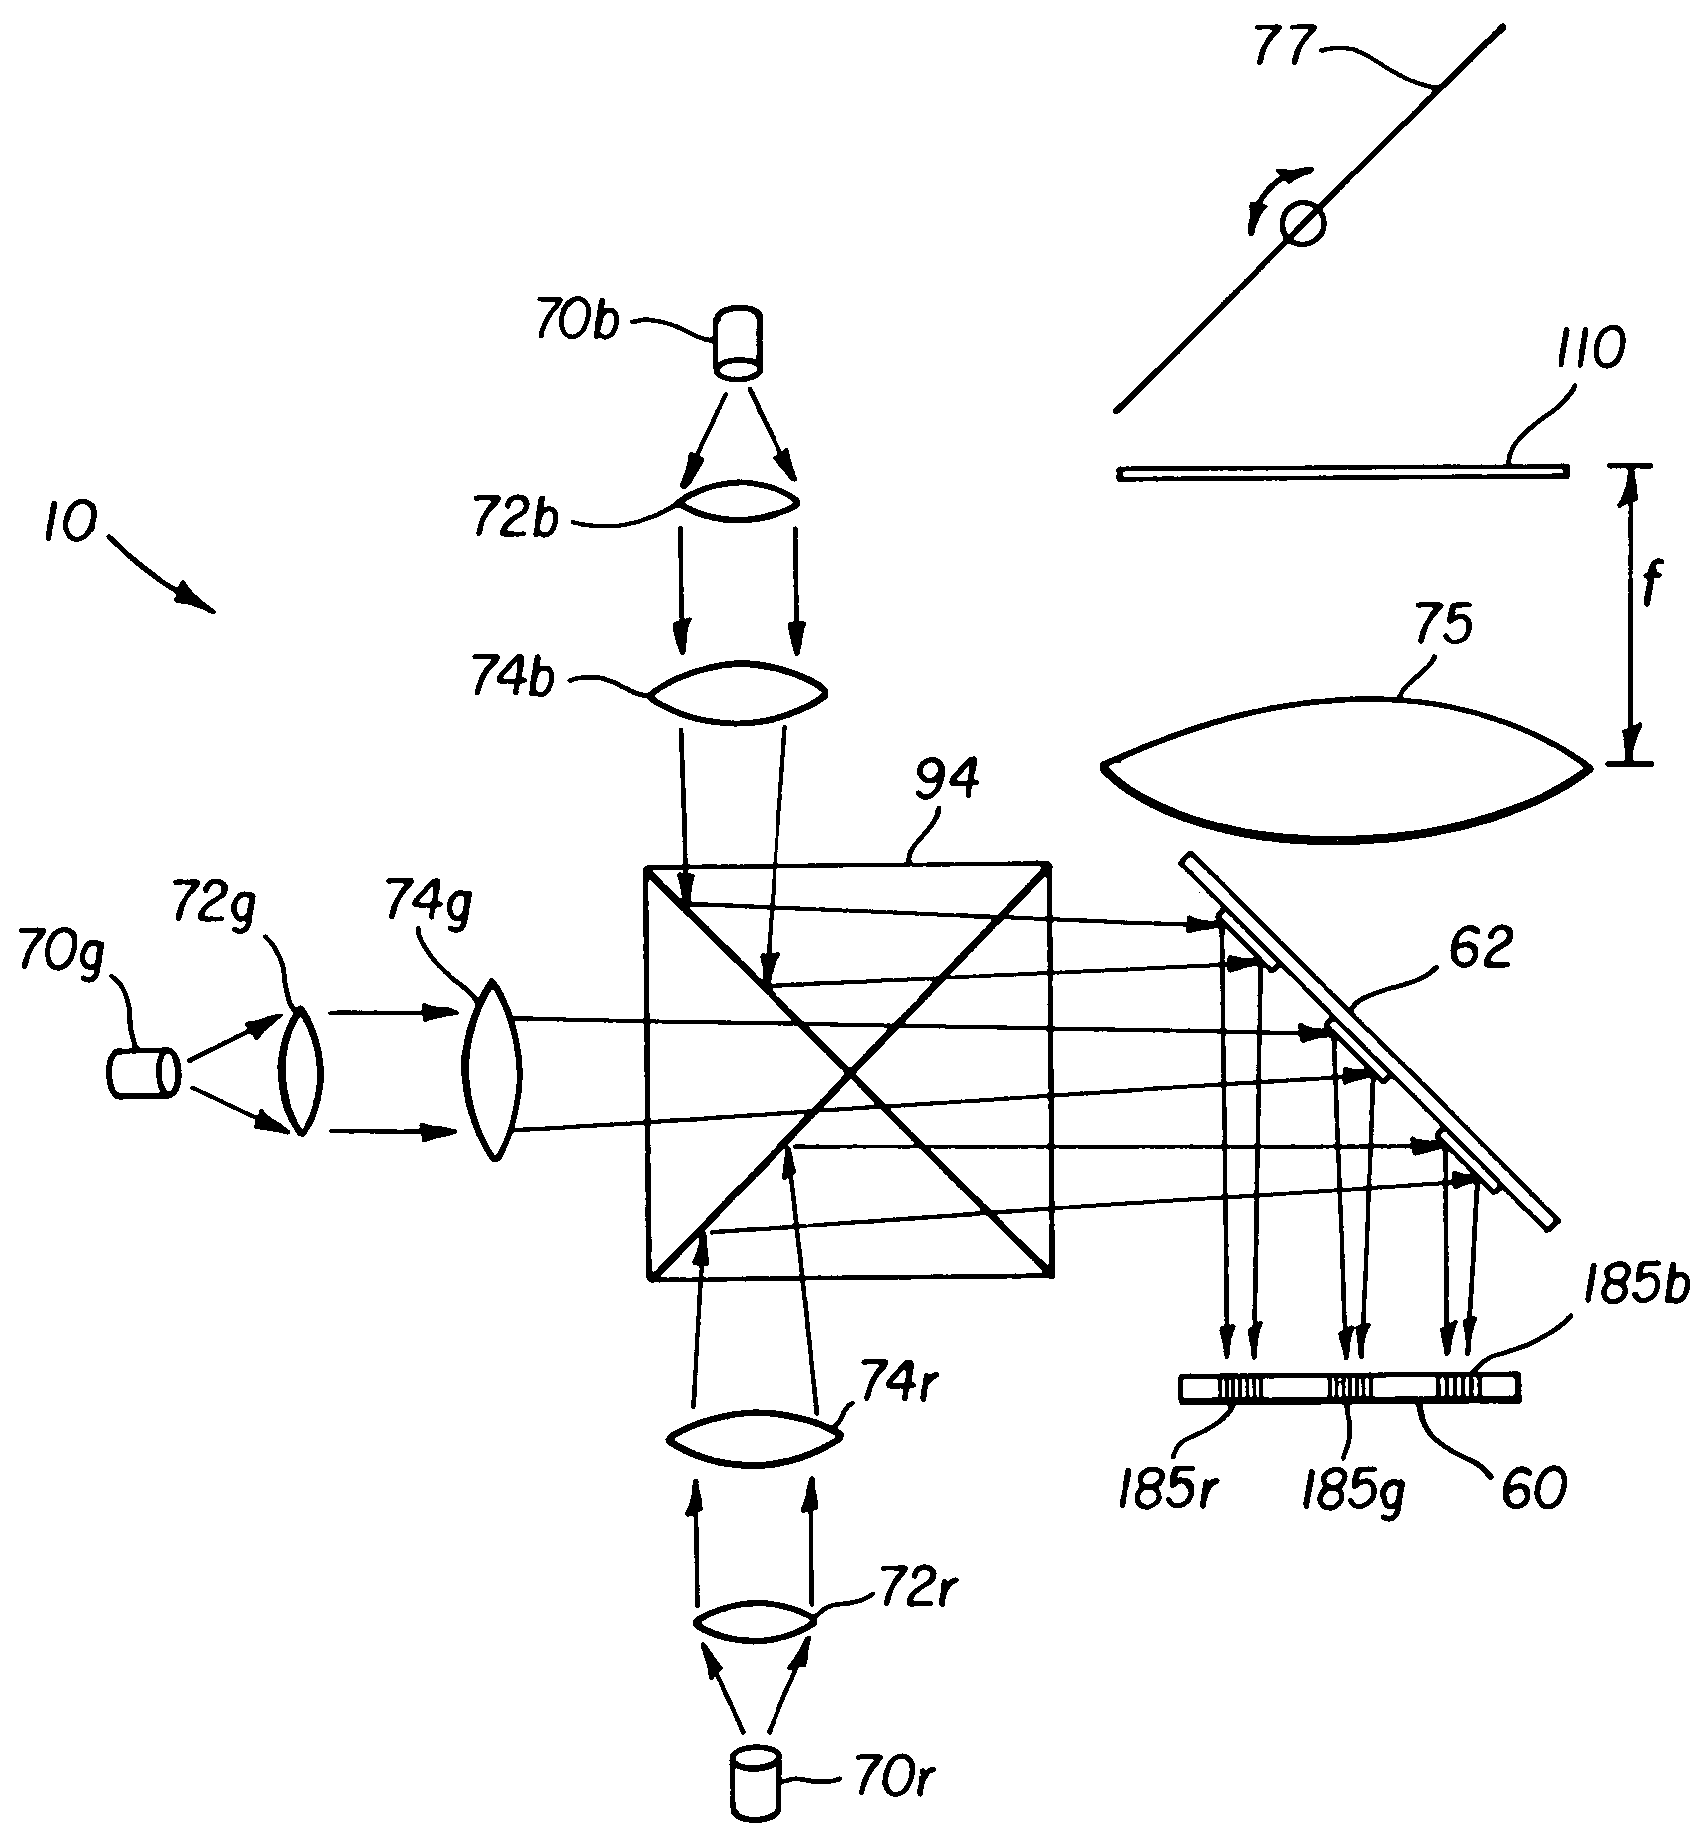 Display system incorporating trilinear electromechanical grating device